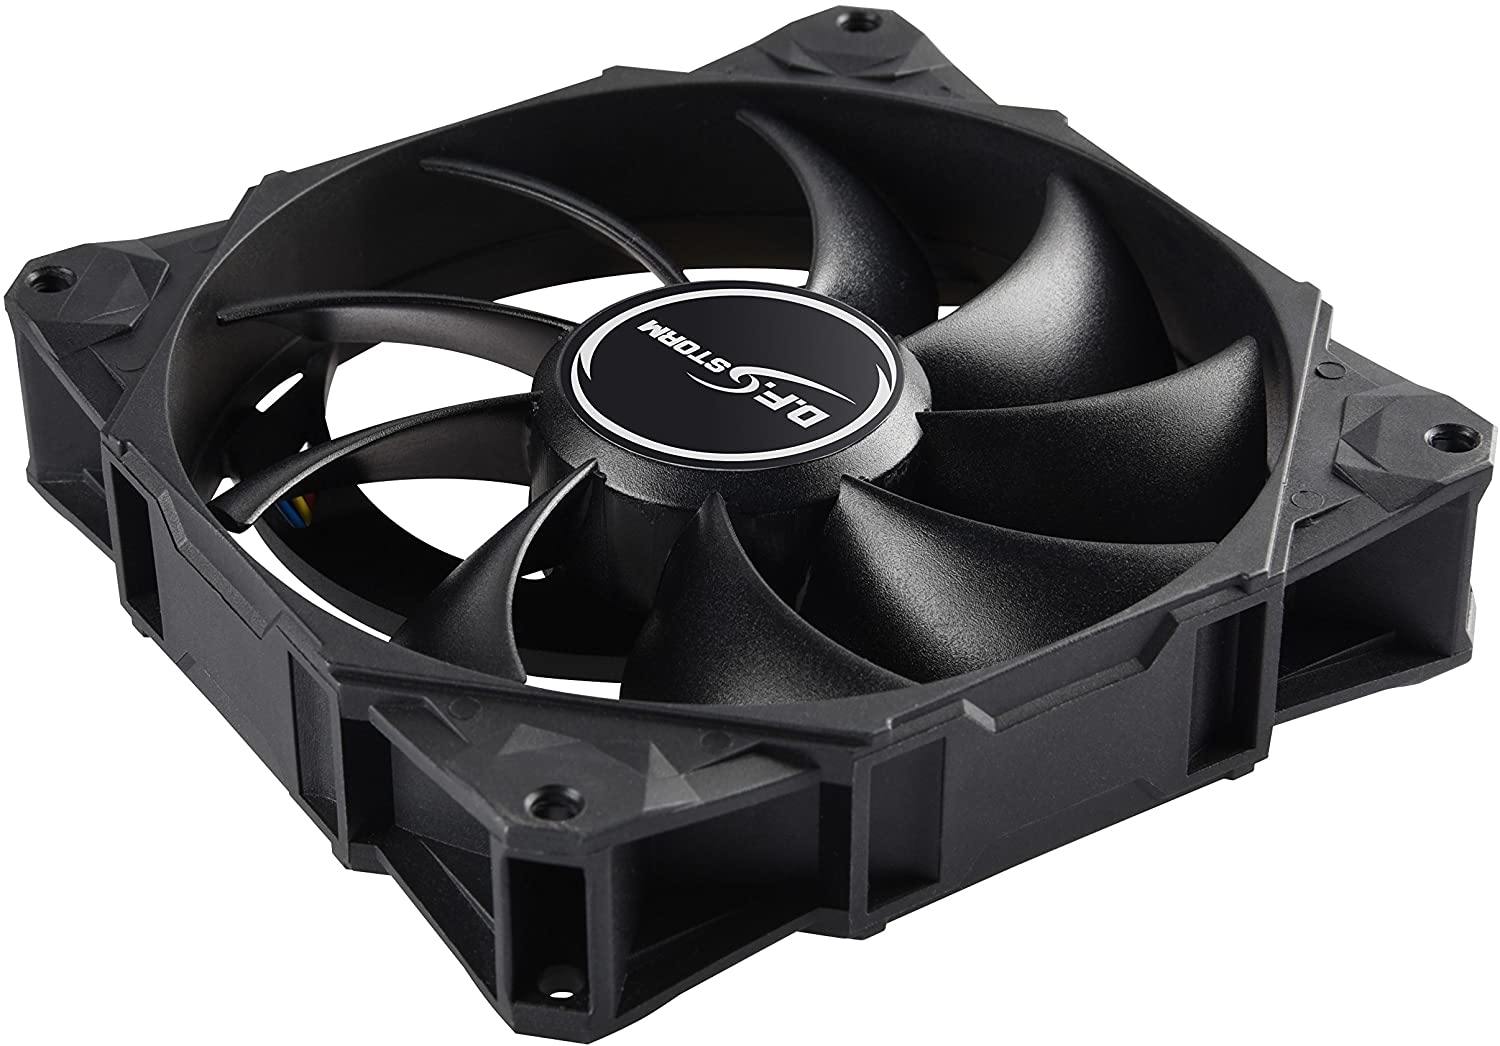 Enermax D.F. Storm 120Mm Dust Free Rotation Technology High Performance 3,500 RPM with 3 Peak RPM Options and 4-Pin PWM Connector Case Fan, UCDFS12P